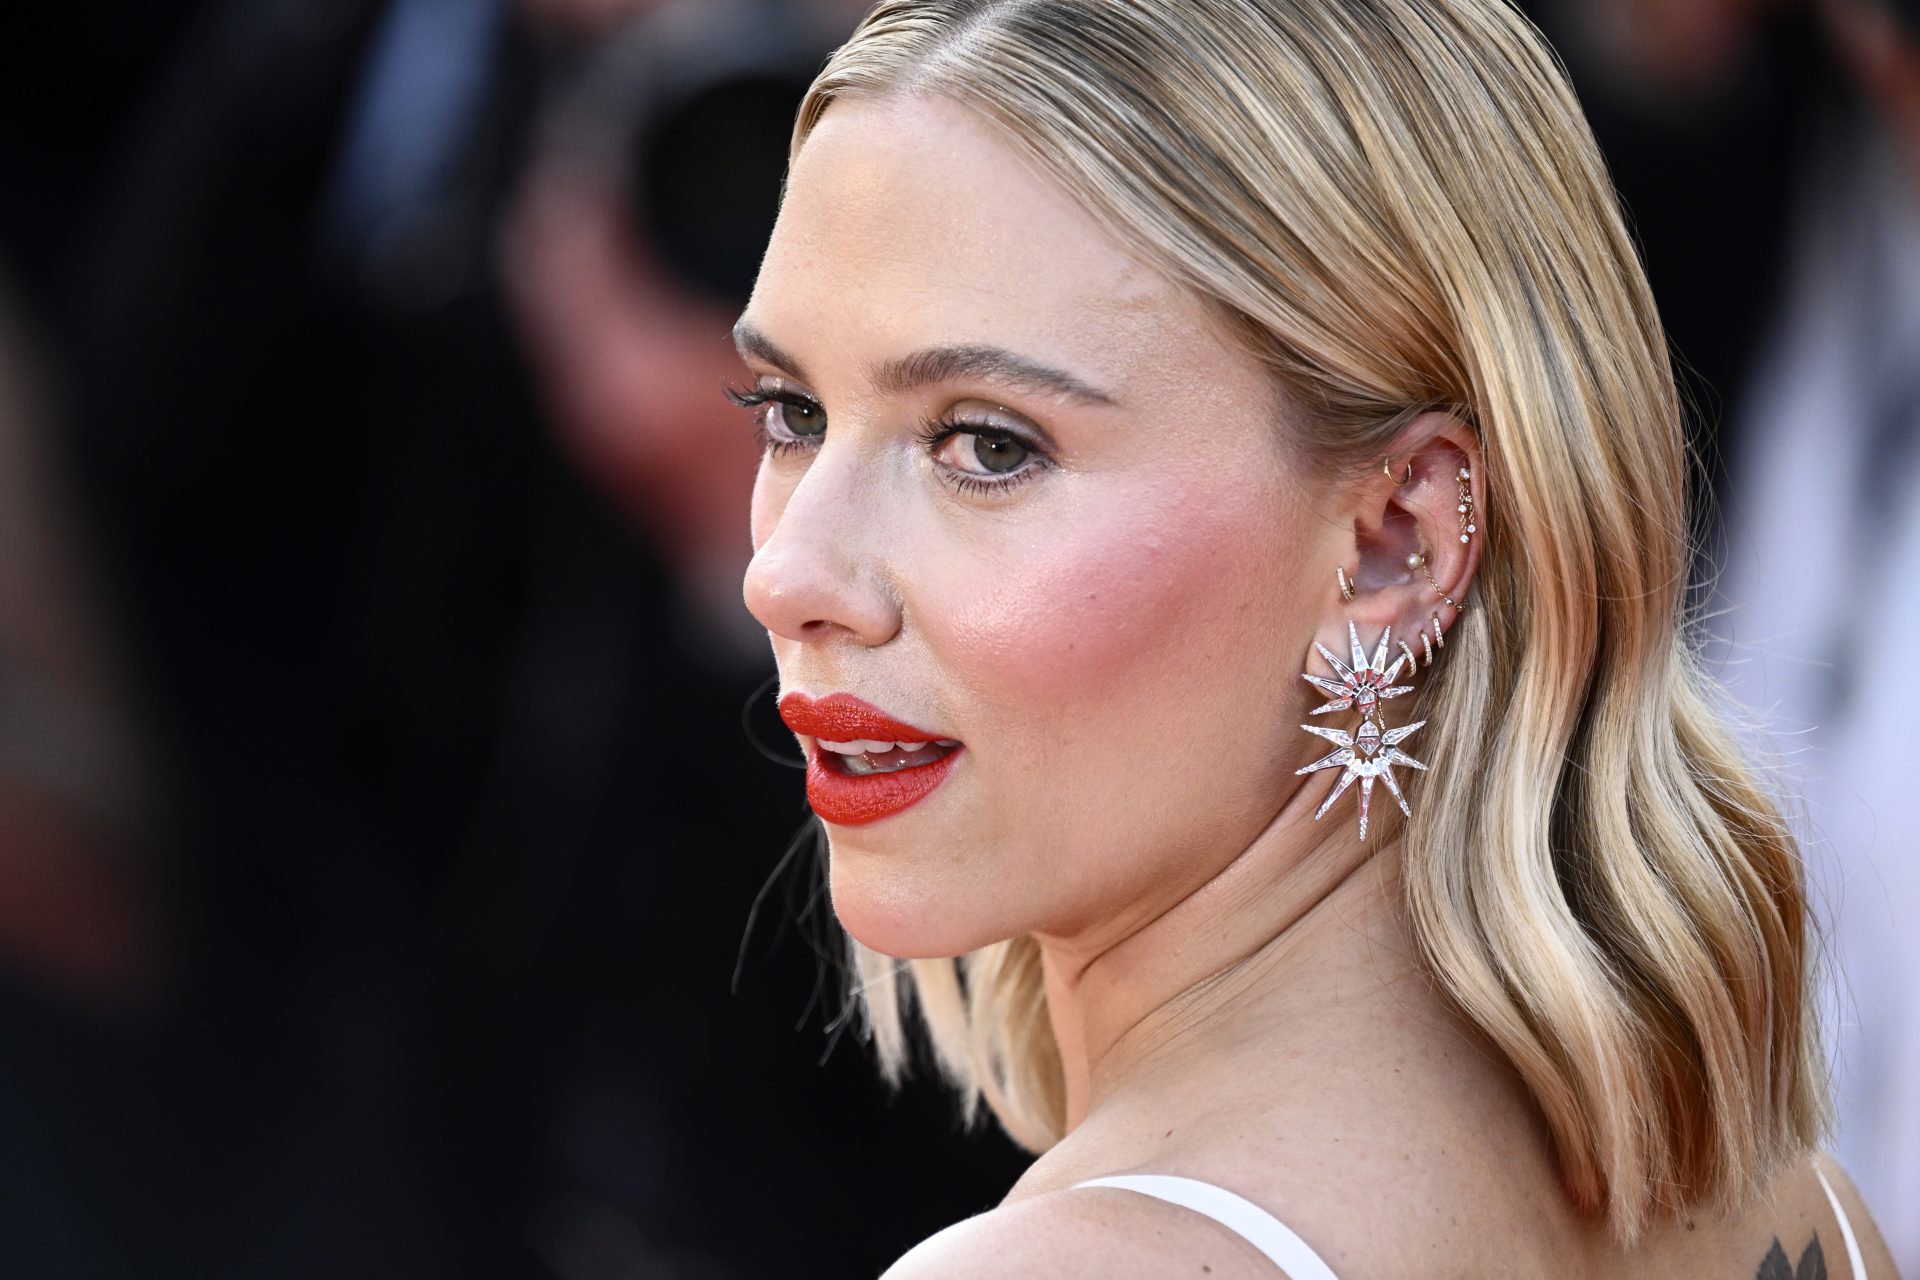 Dystopia? Scarlett Johansson 'shocked' that ChatGPT used something like 'Her' voice